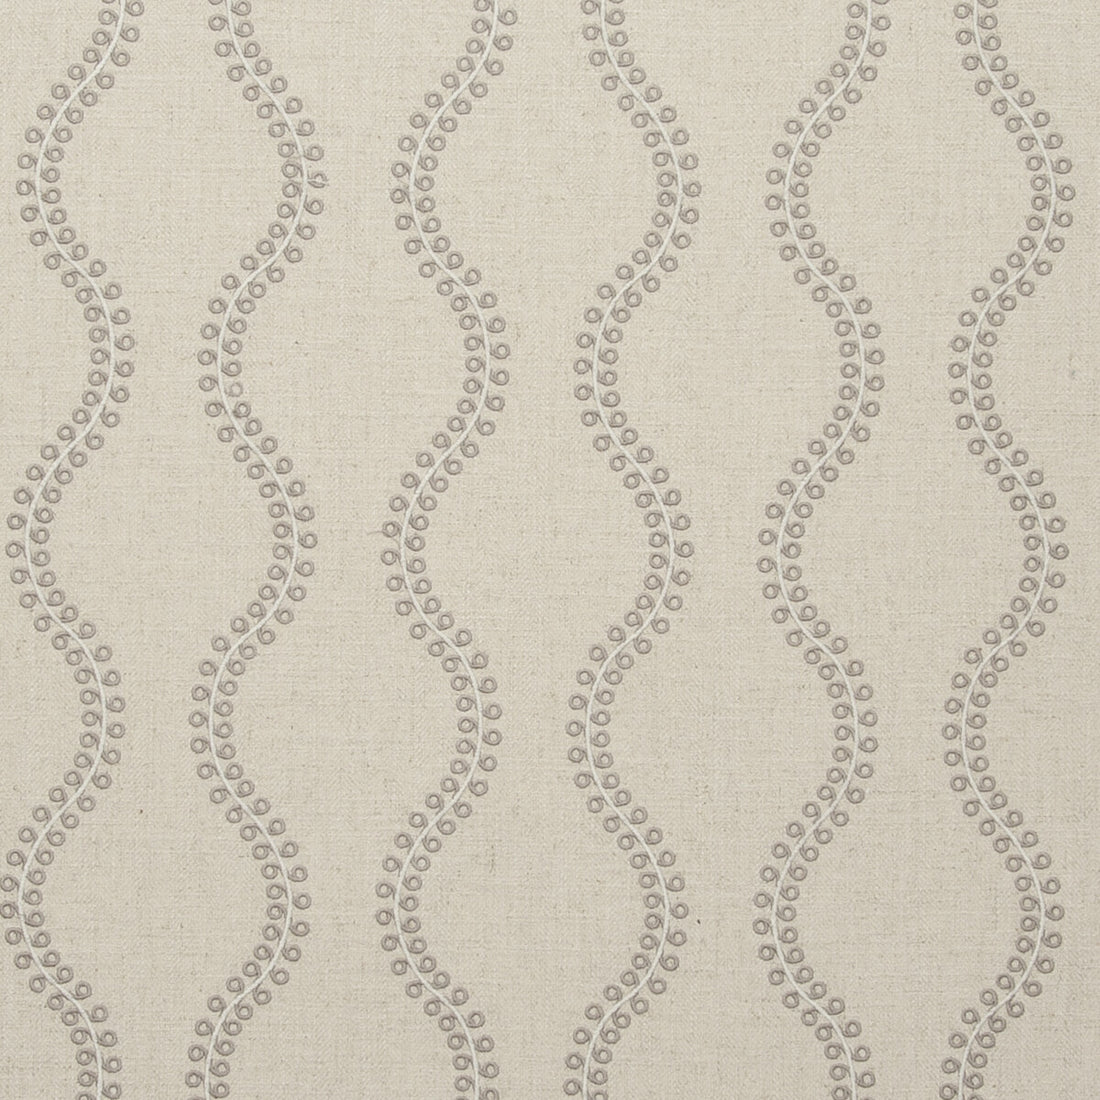 Woburn fabric in taupe color - pattern F0741/05.CAC.0 - by Clarke And Clarke in the Clarke &amp; Clarke Manor House collection